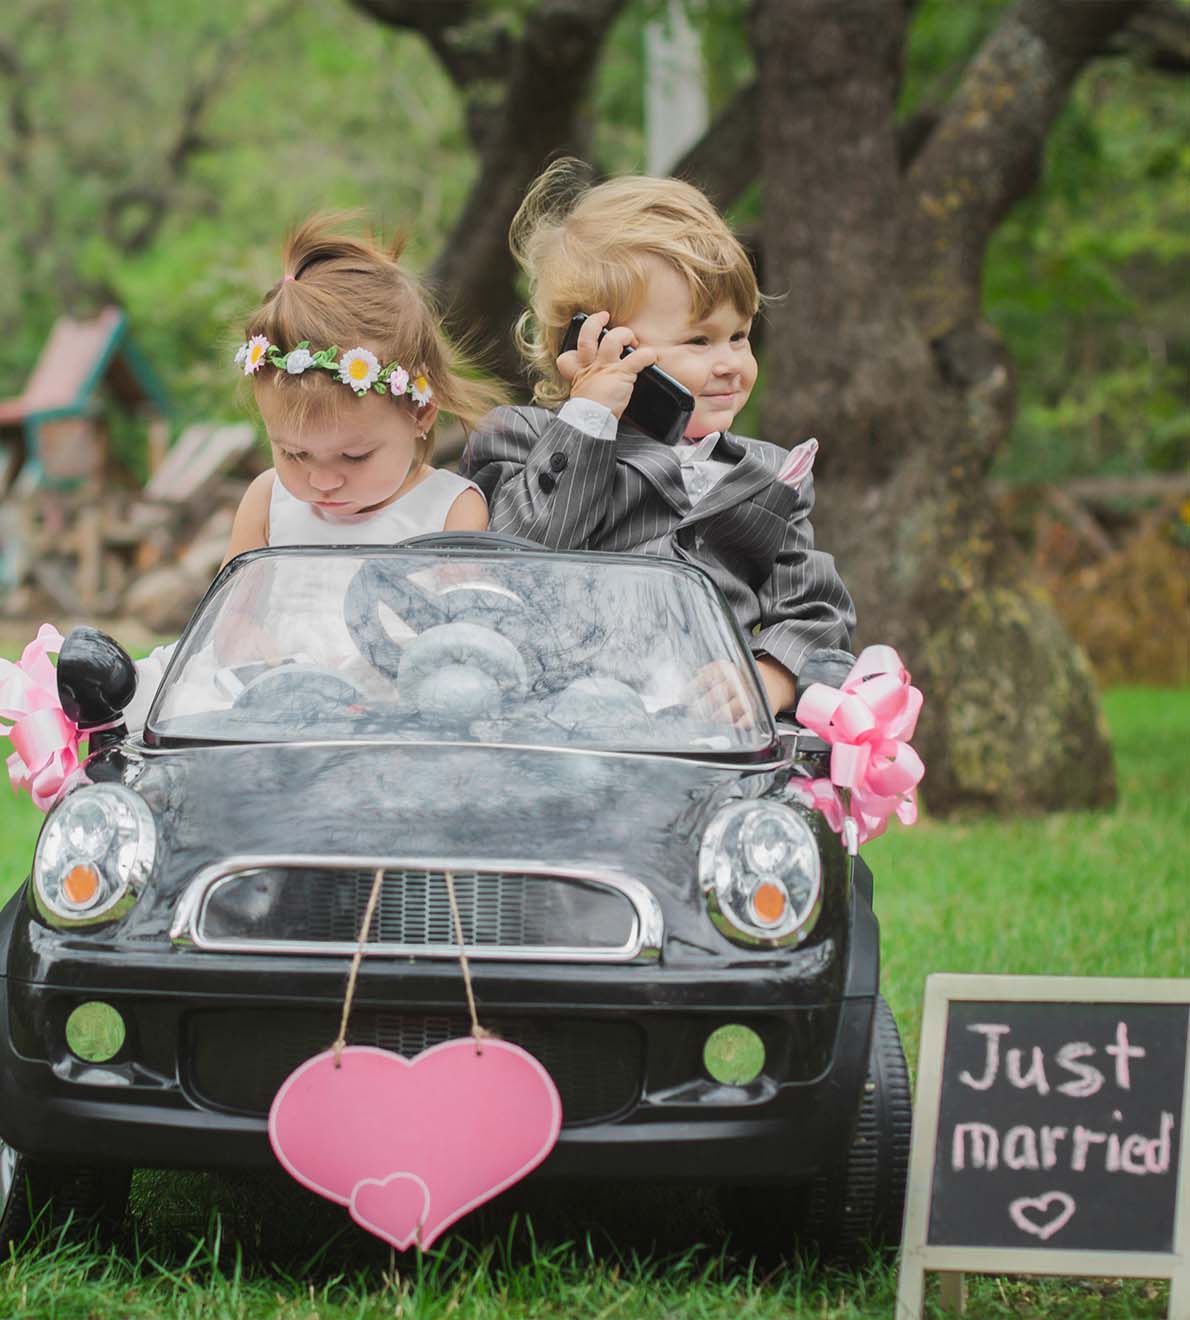 Image of two adorable kids playfully imitating a married couple in a mini car, symbolising the fun and whimsical aspects discussed in Ash Reynolds' FAQs.